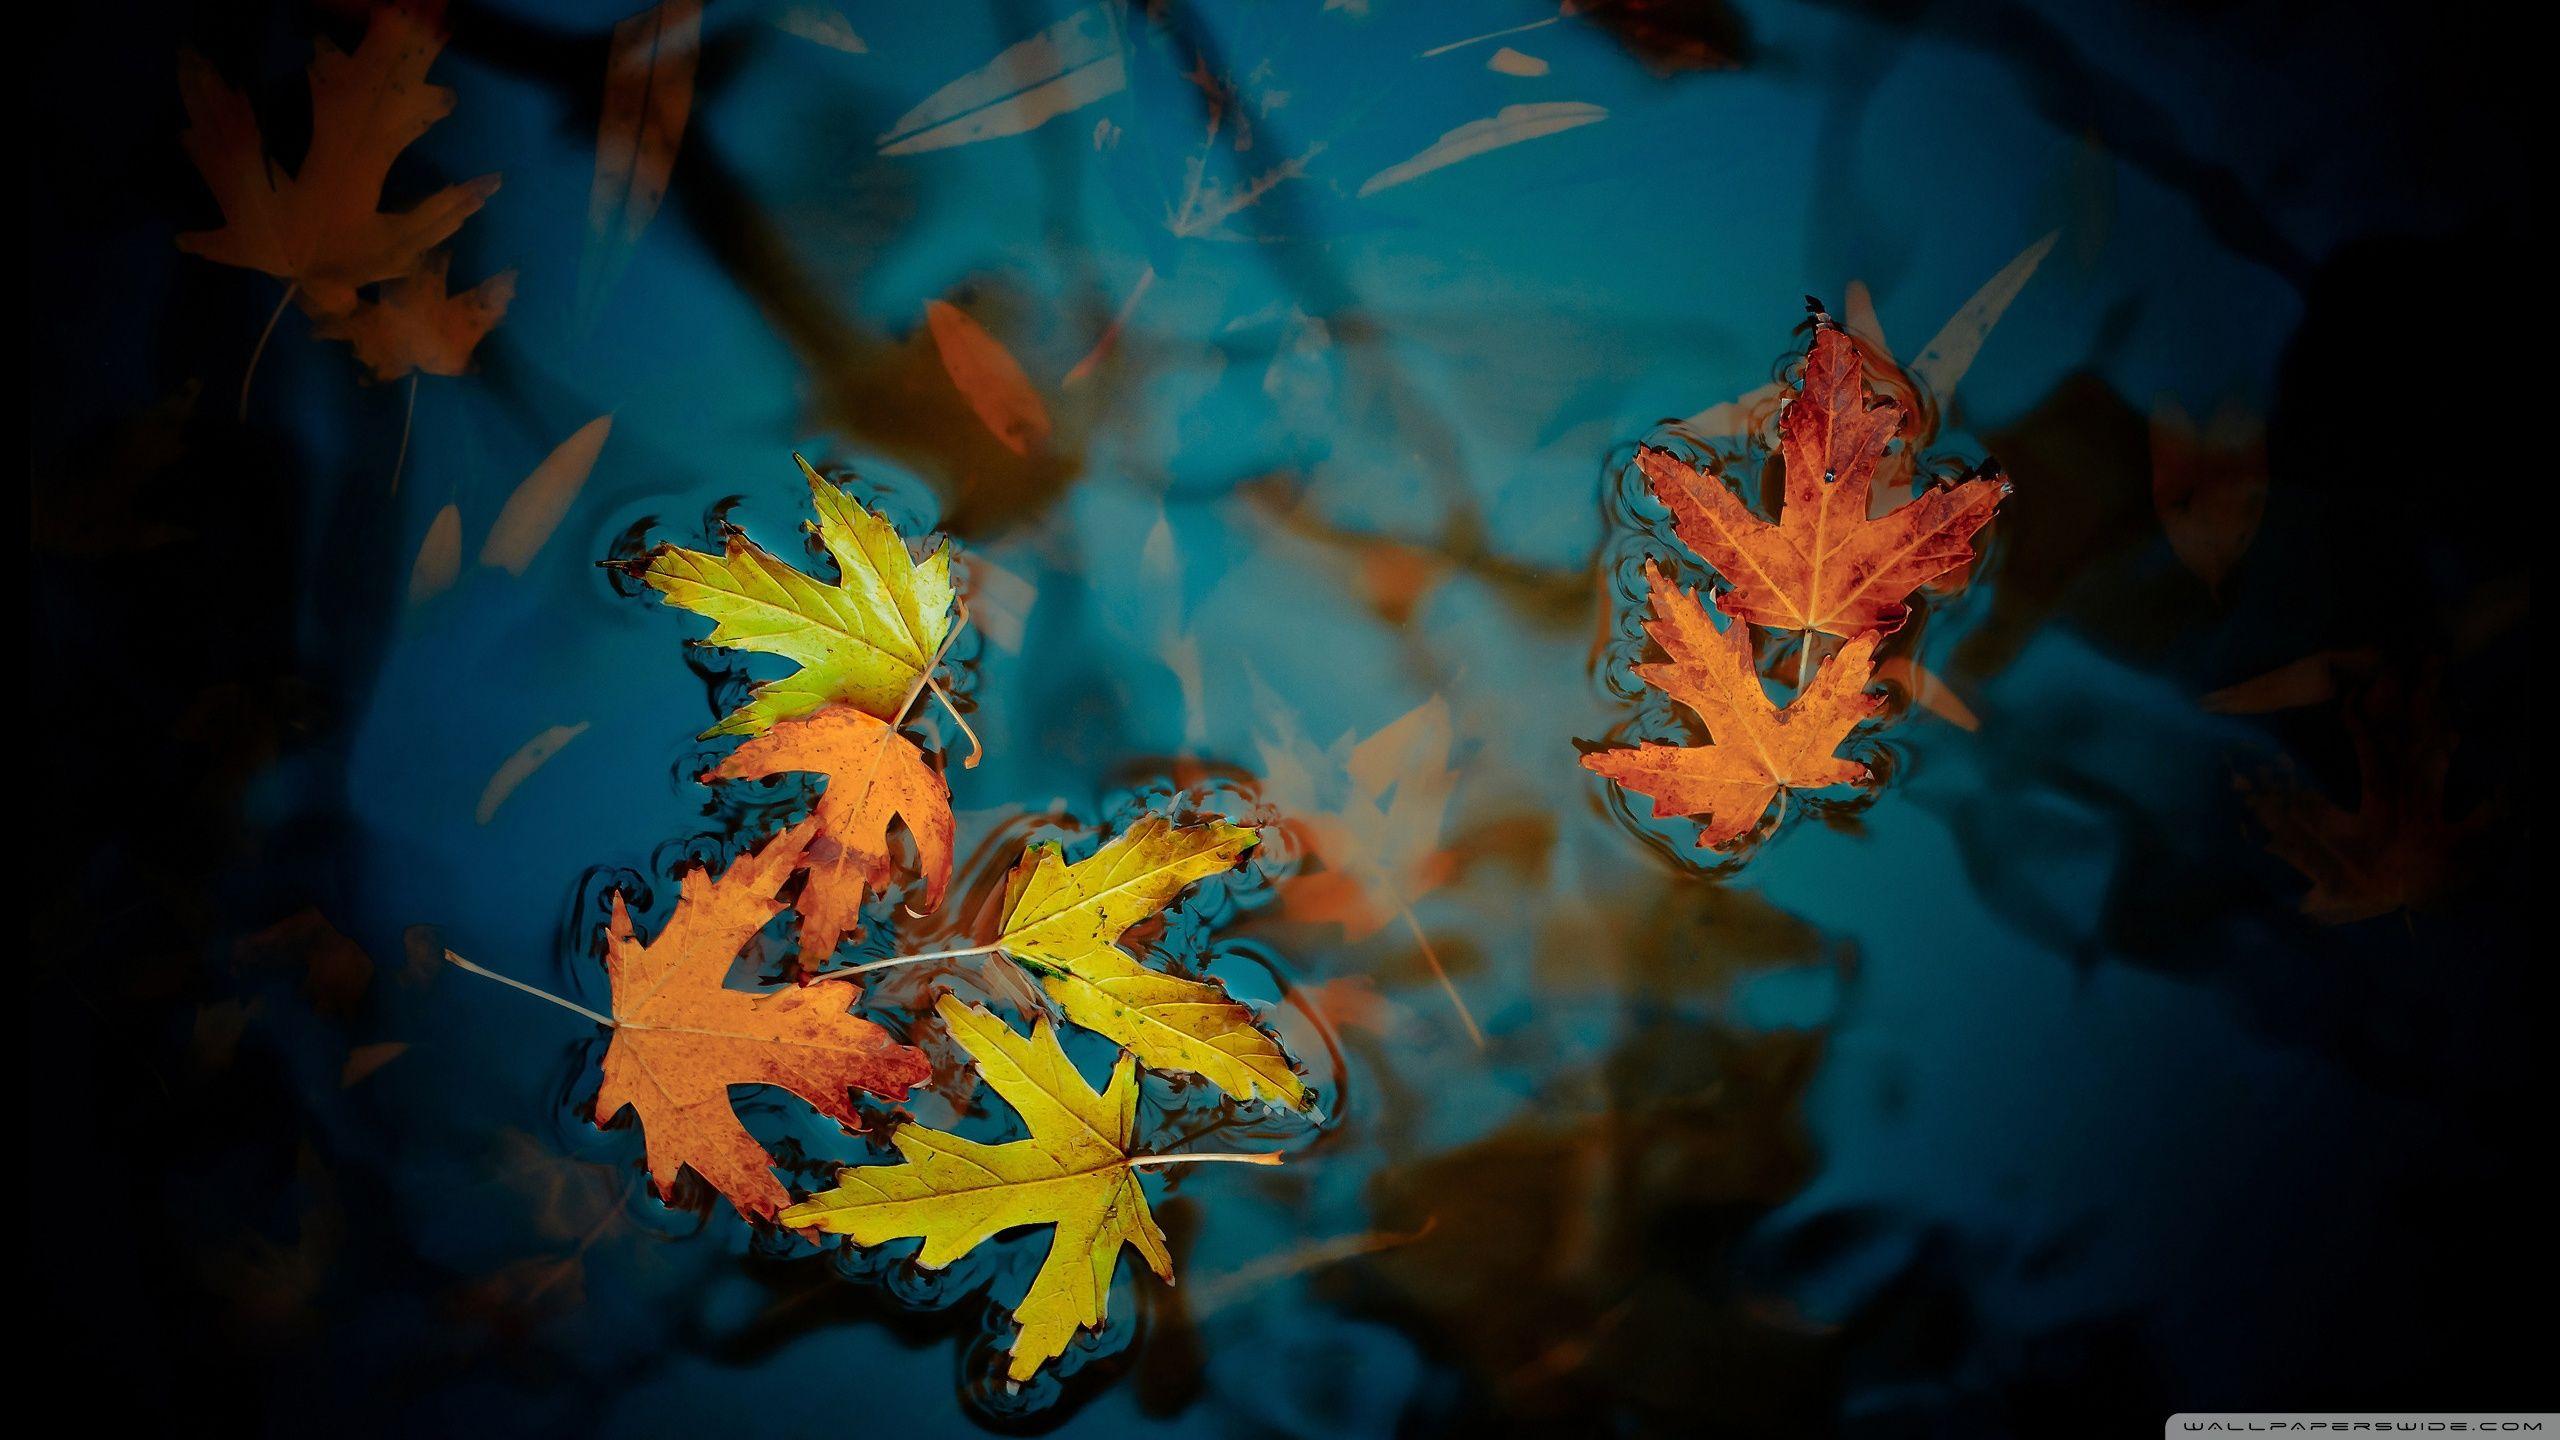 Autumn Leaves Hd Wallpapers - Wallpaper Cave